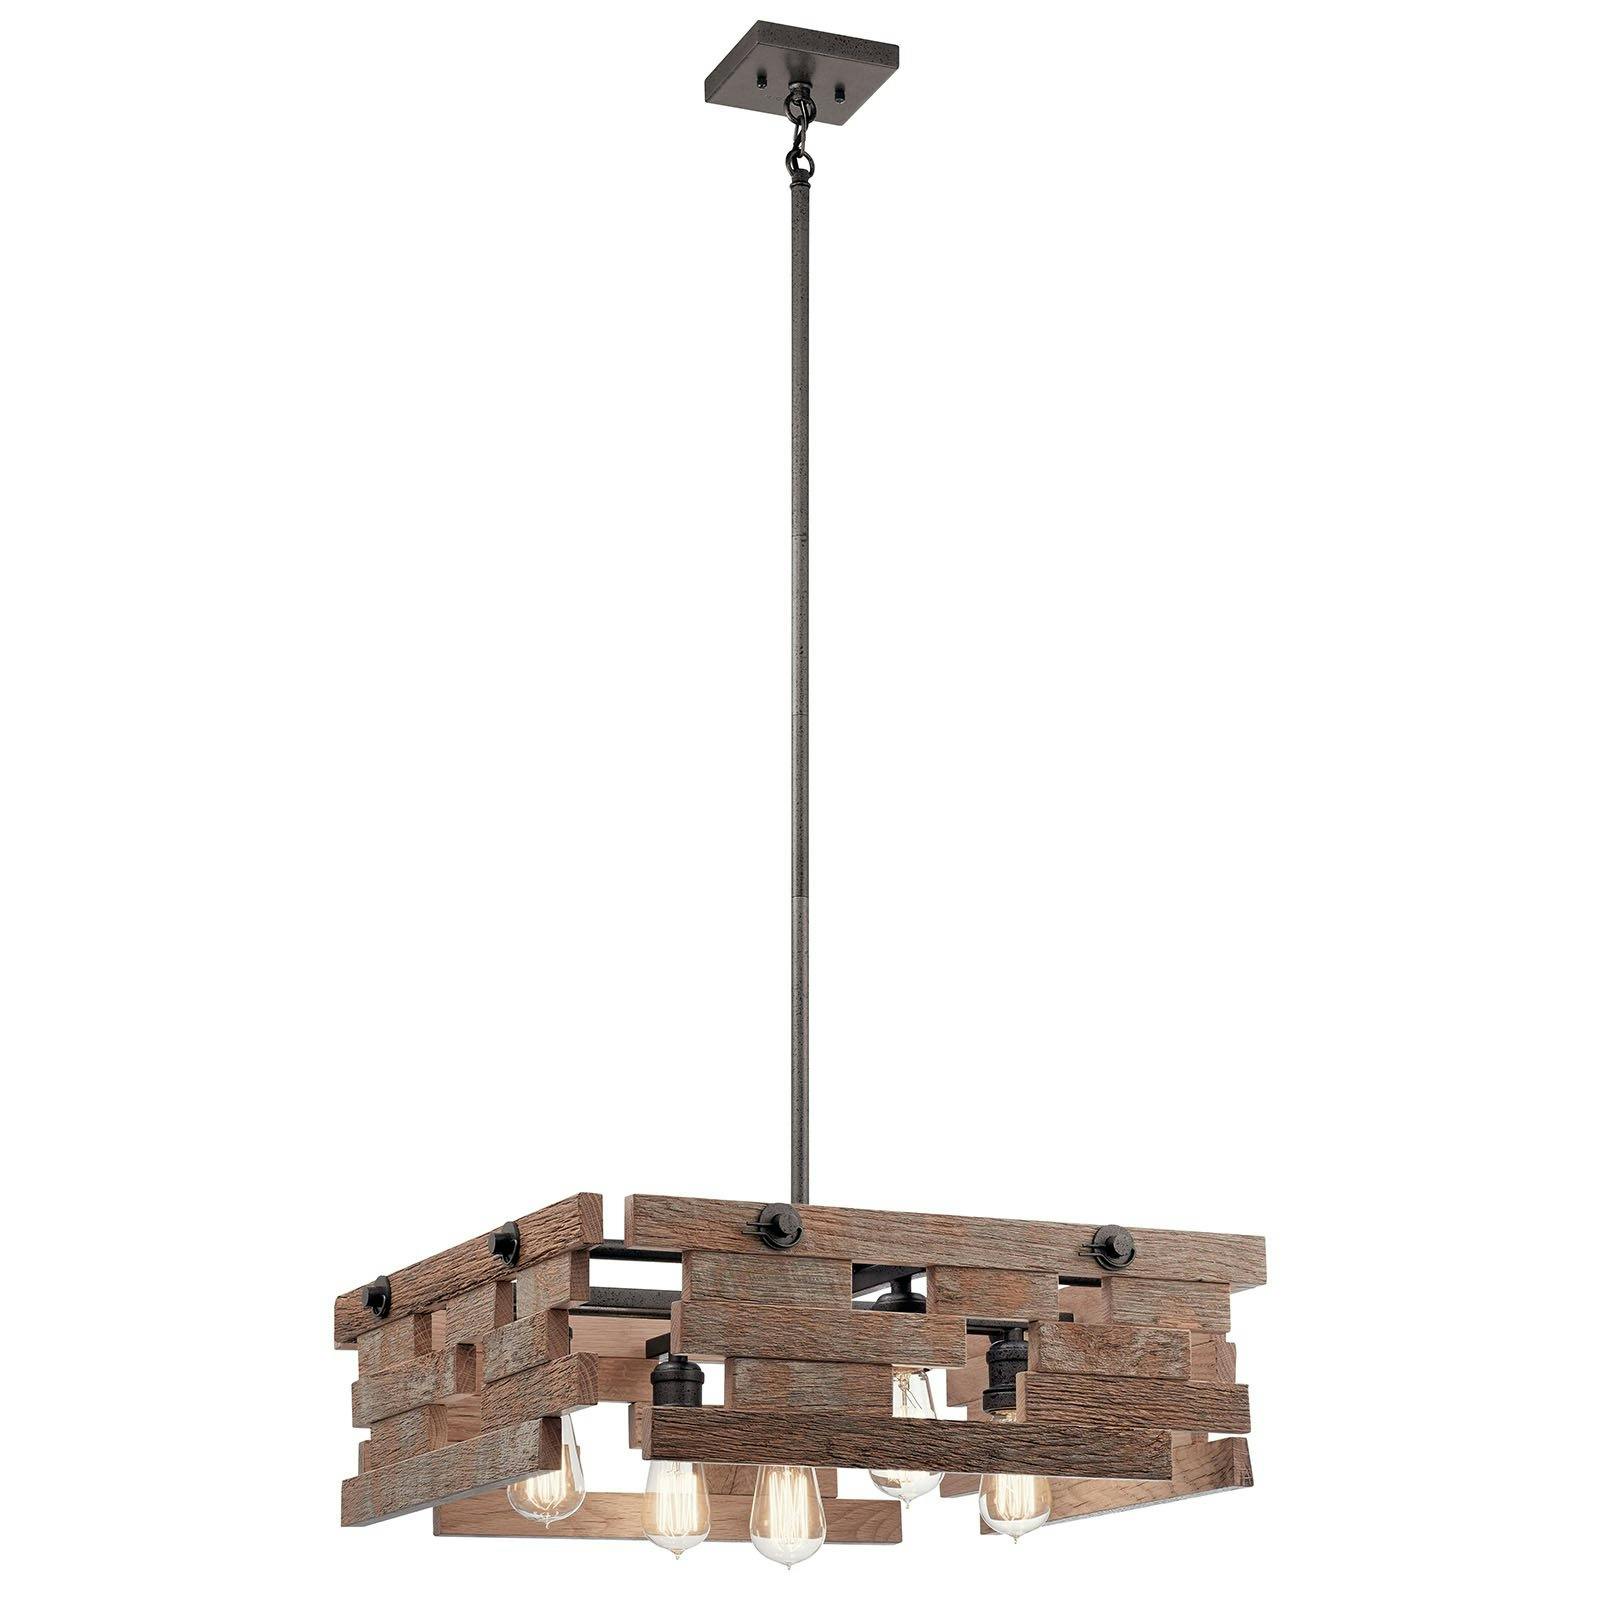 Cuyahoga Mill™ Chandelier Anvil Iron on a white background